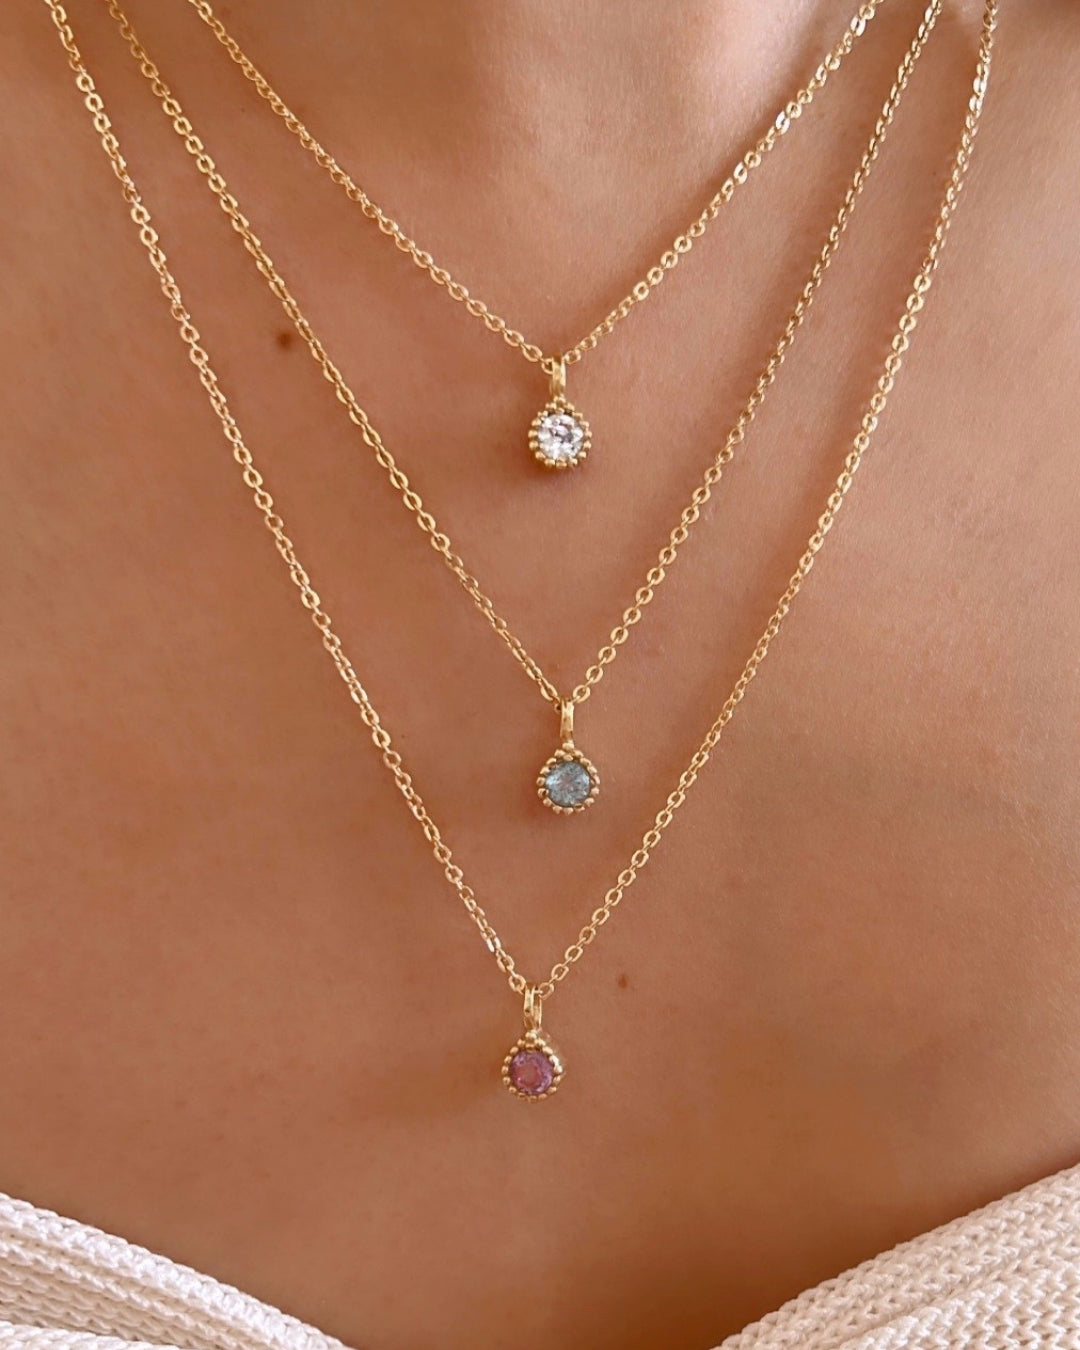 Cable chain necklace paired with birthstone pendants 